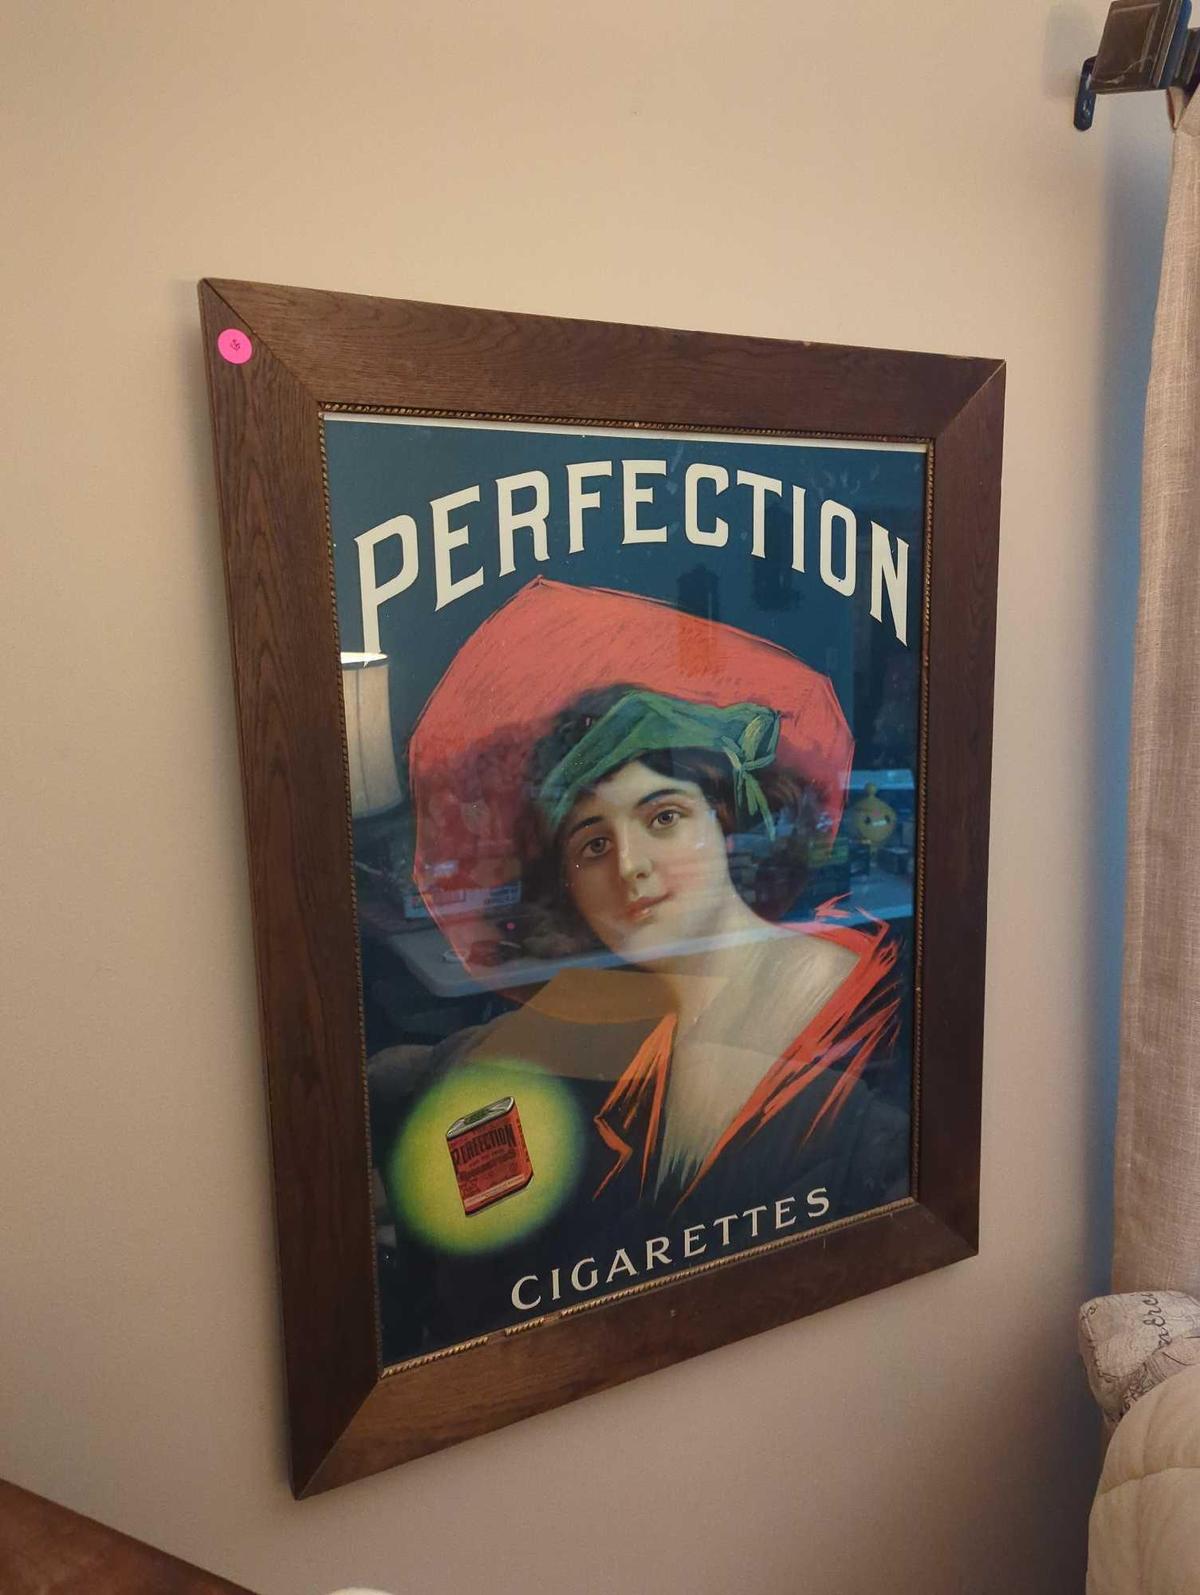 (LR) FRAMED ADVERTISEMENT FOR PERFECTION CIGARETTES, 24 1/2"L 34 1/4"W